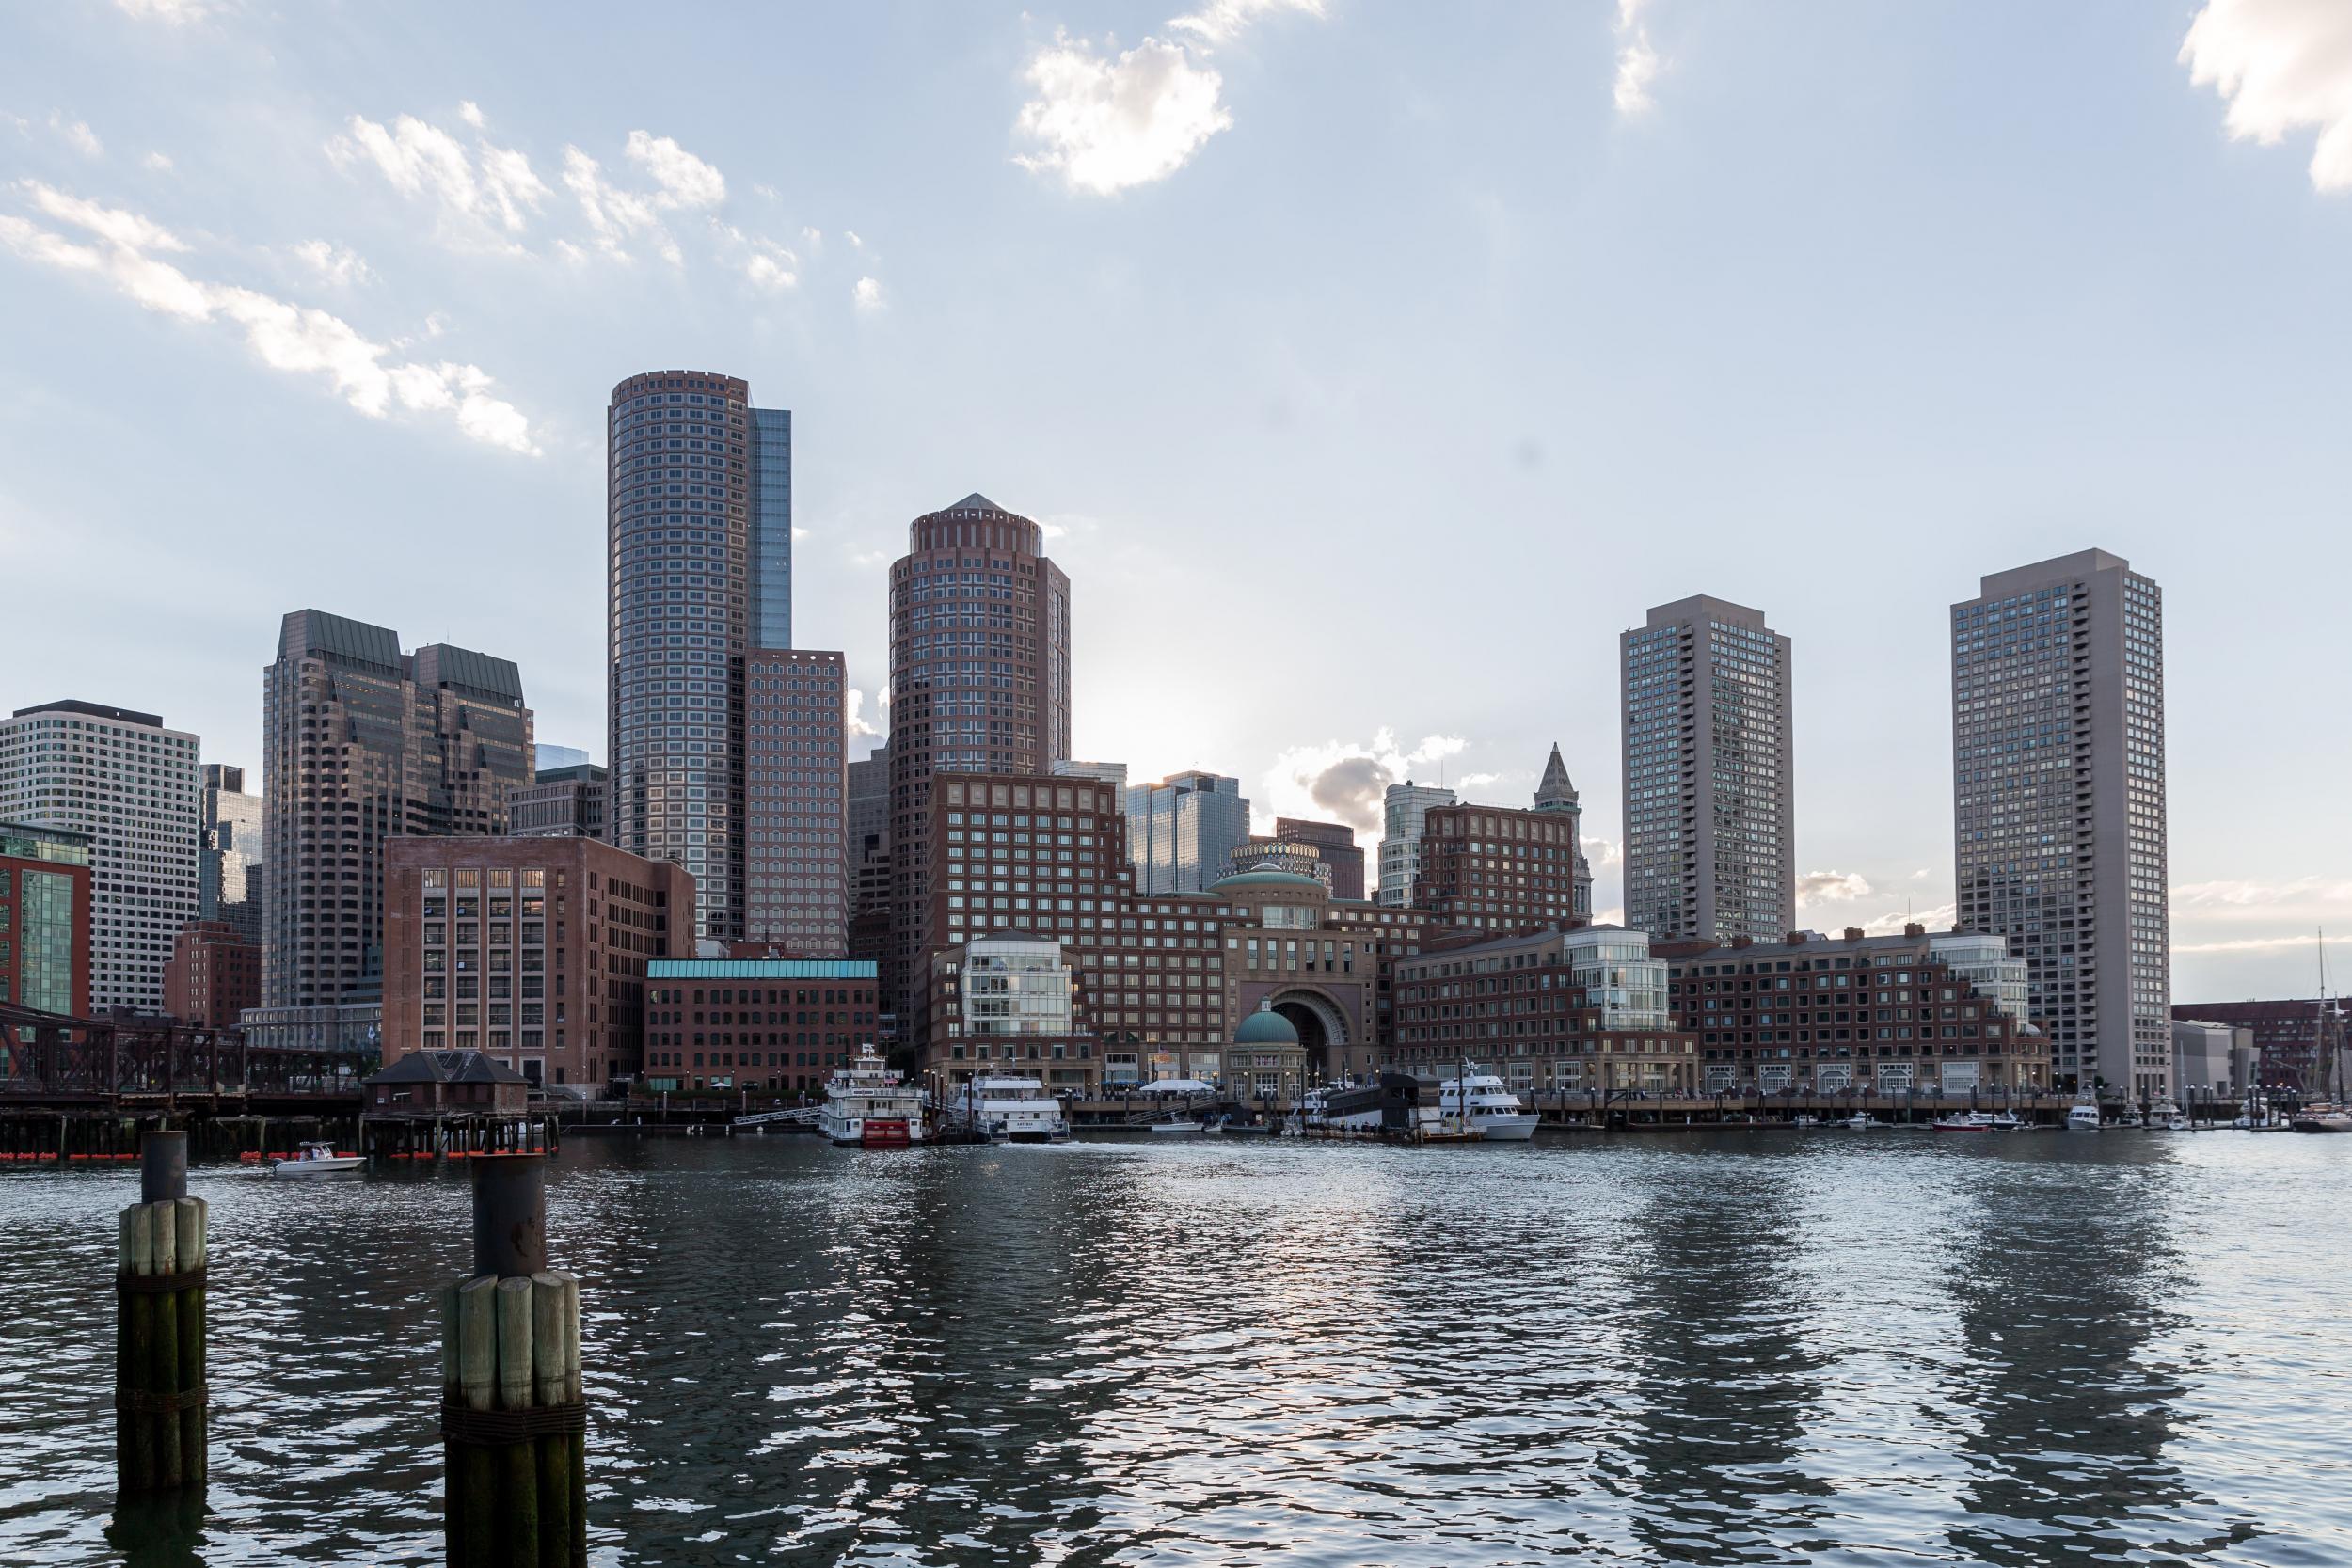 Financial district of Boston, with water in the foreground